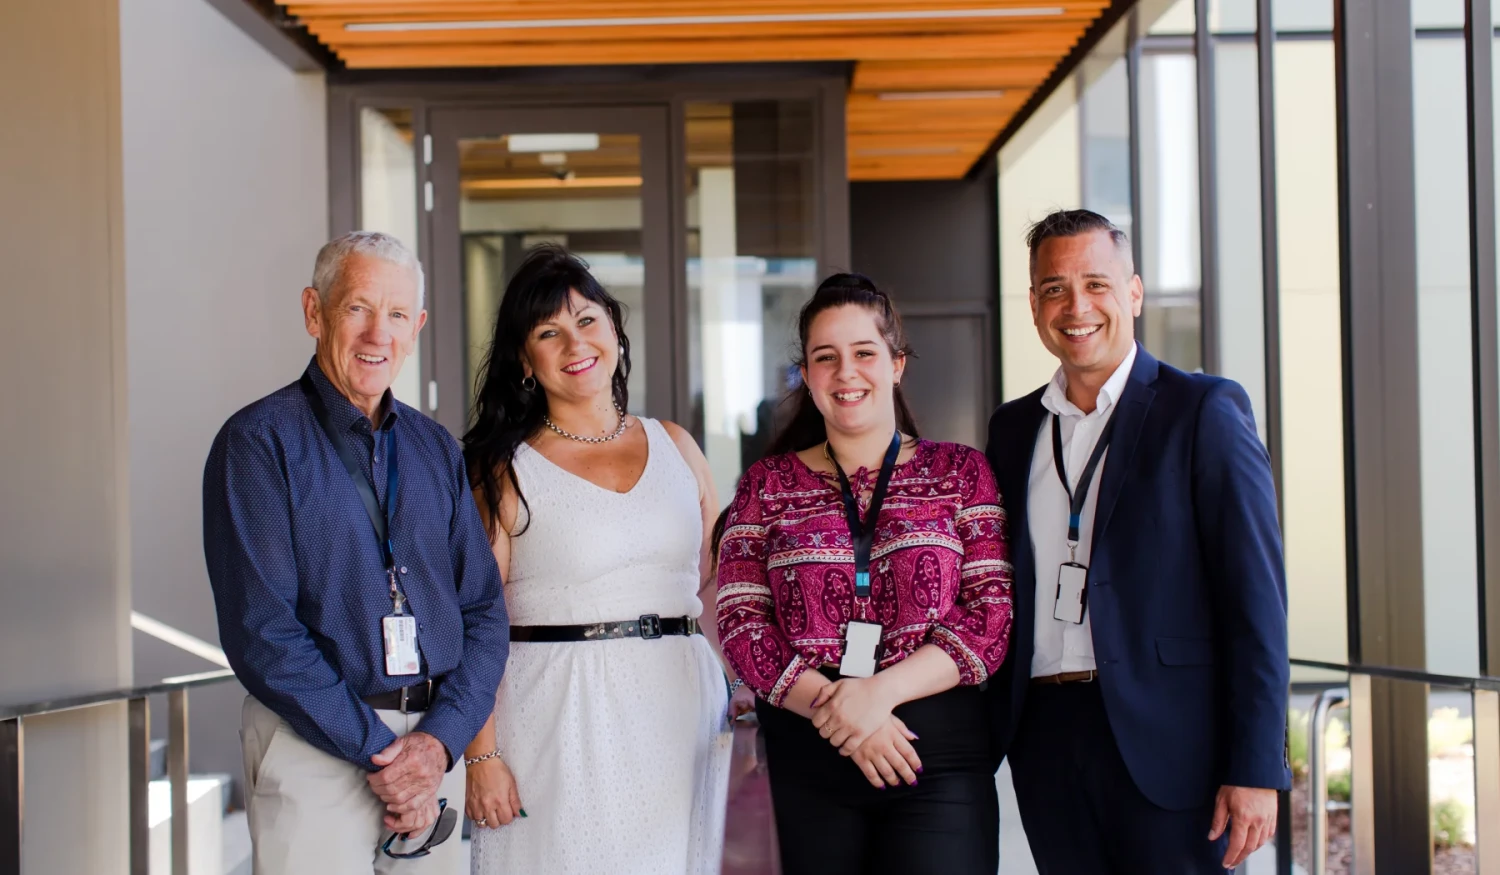 Four Health New Zealand Corporate leaders standing by the building entranceway side by side.